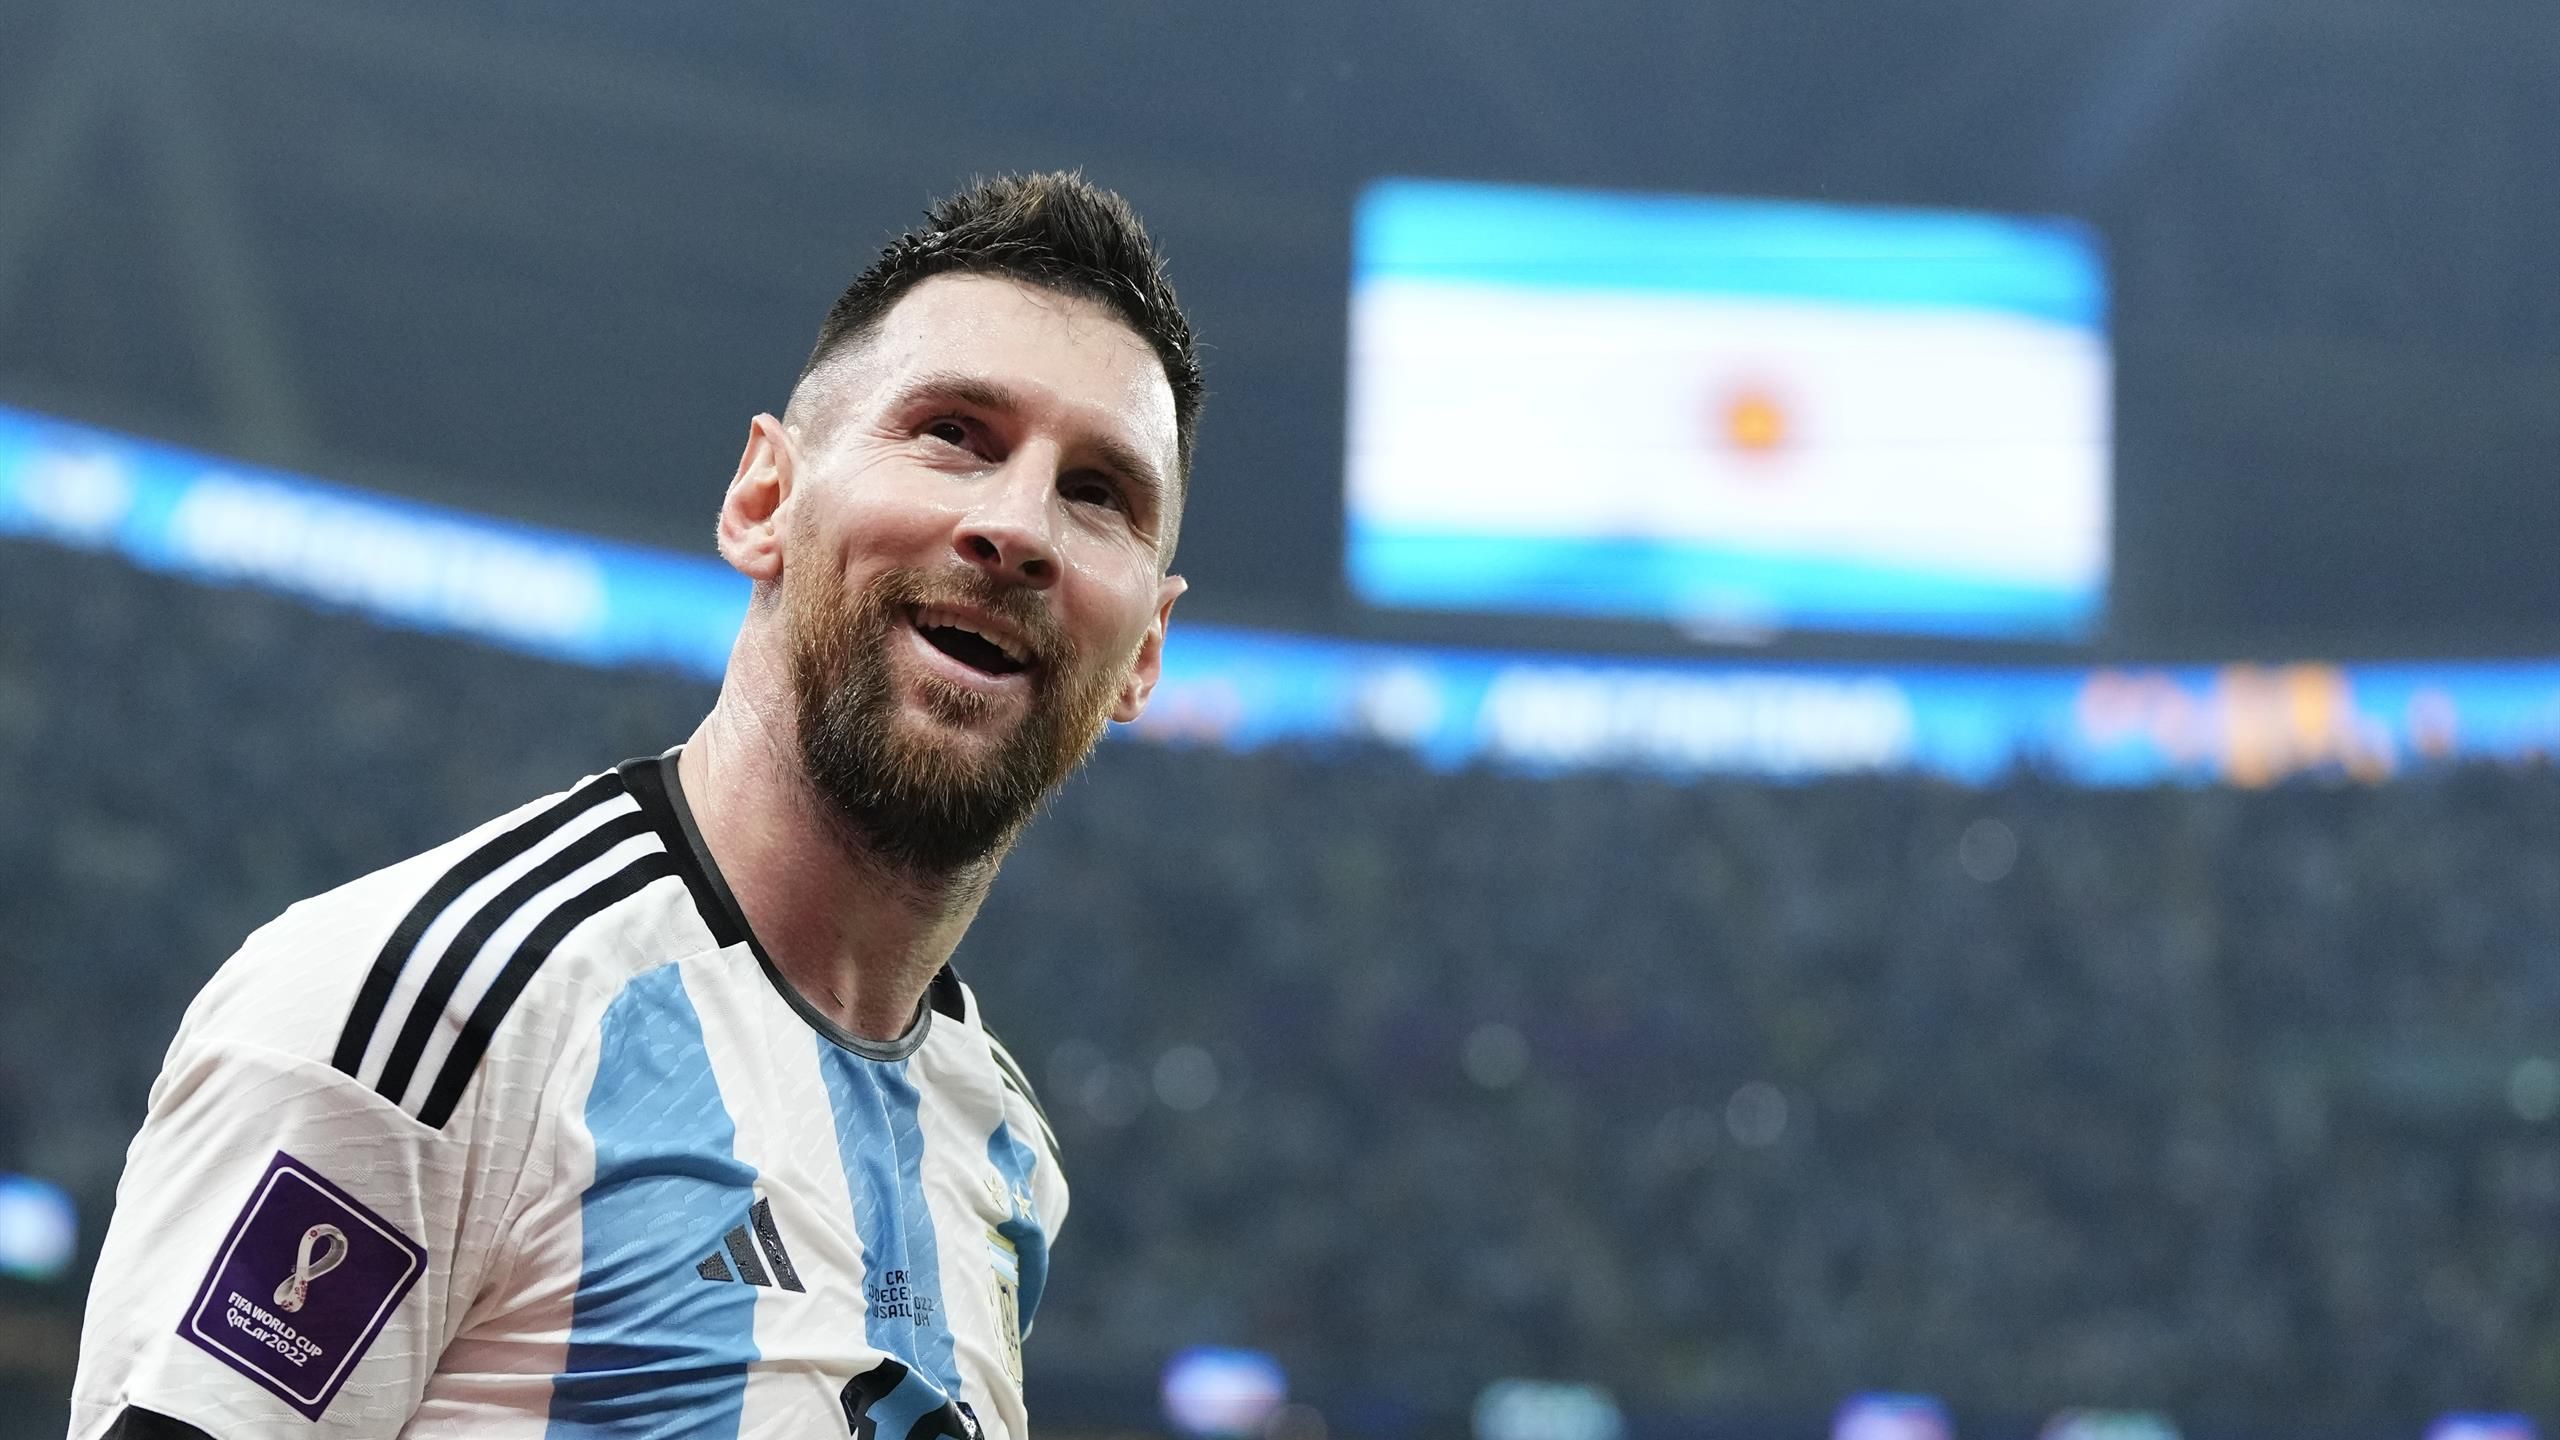 Lionel Messi is on his Last Dance - so how does it compare to